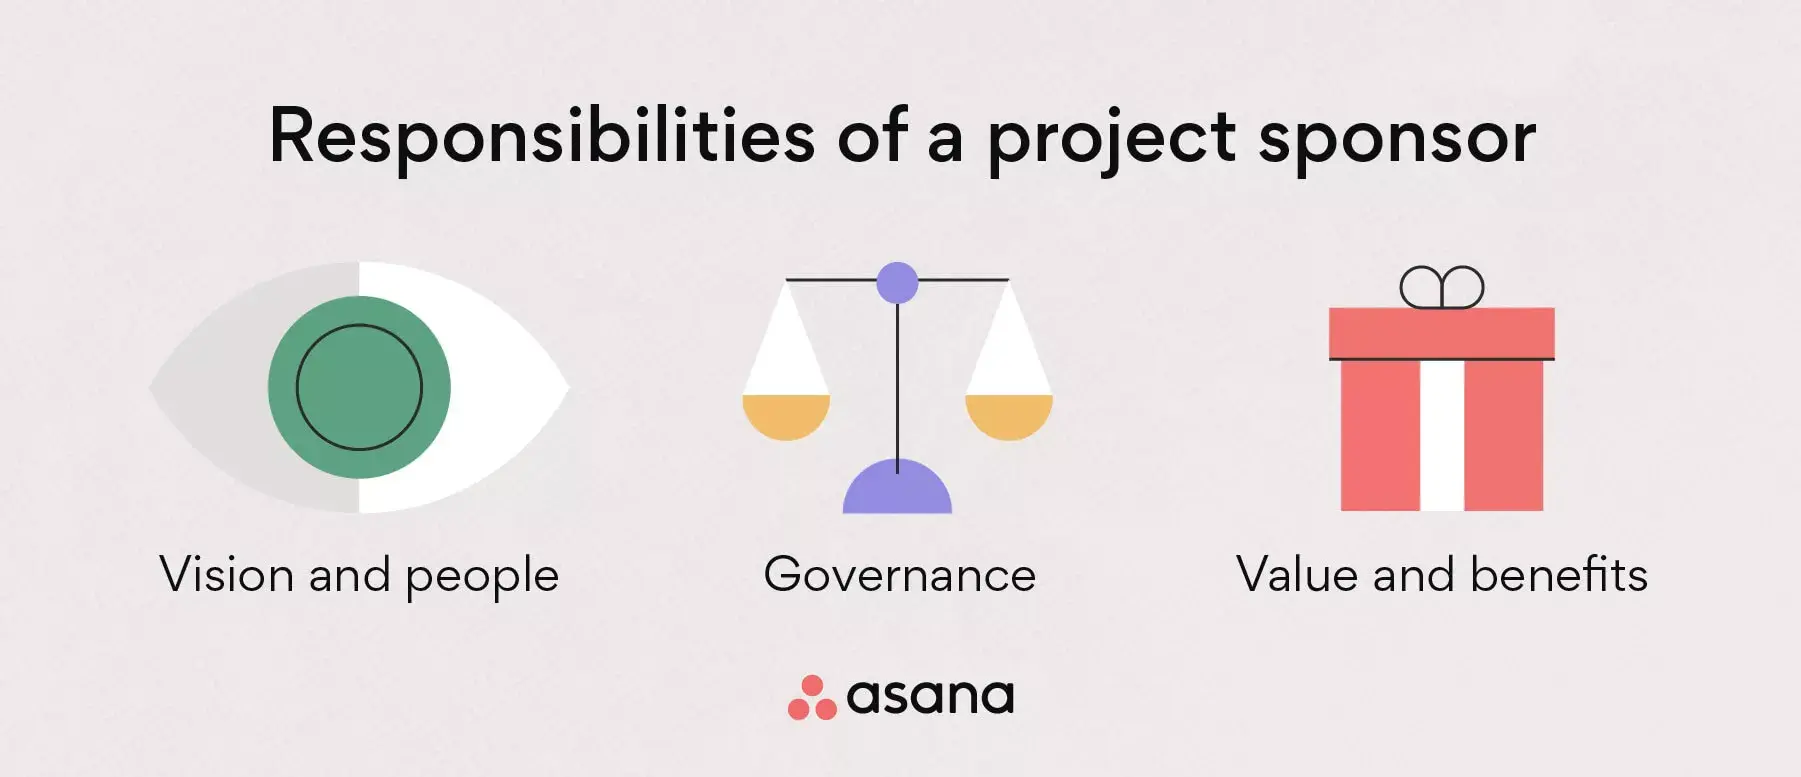 [inline illustration] Responsibilities of a project sponsor (infographic)